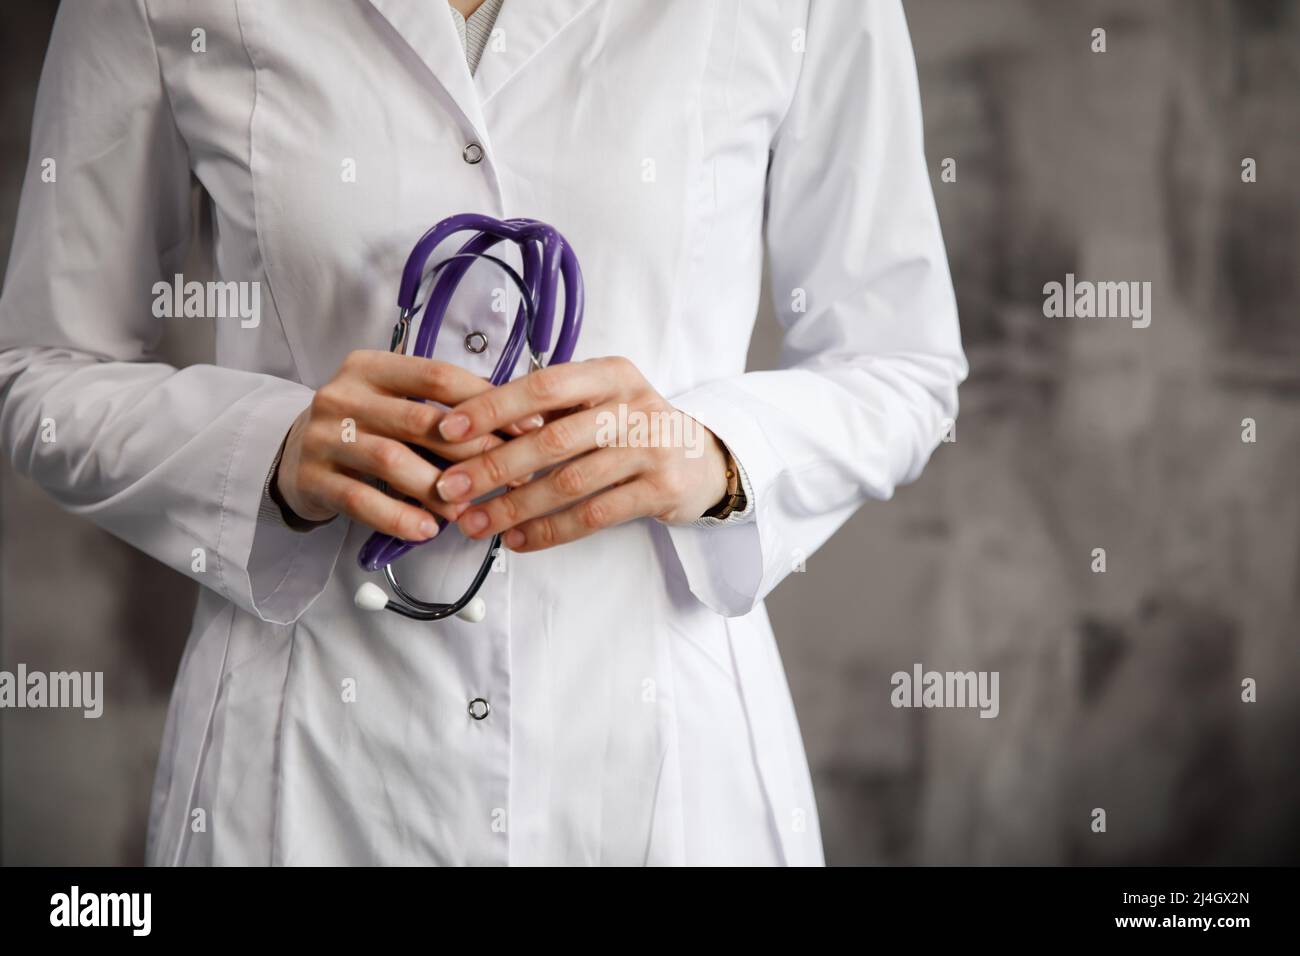 Close up image of a doctor with a stethoscope in her hands. against the background of a blurry hospital. Stock Photo